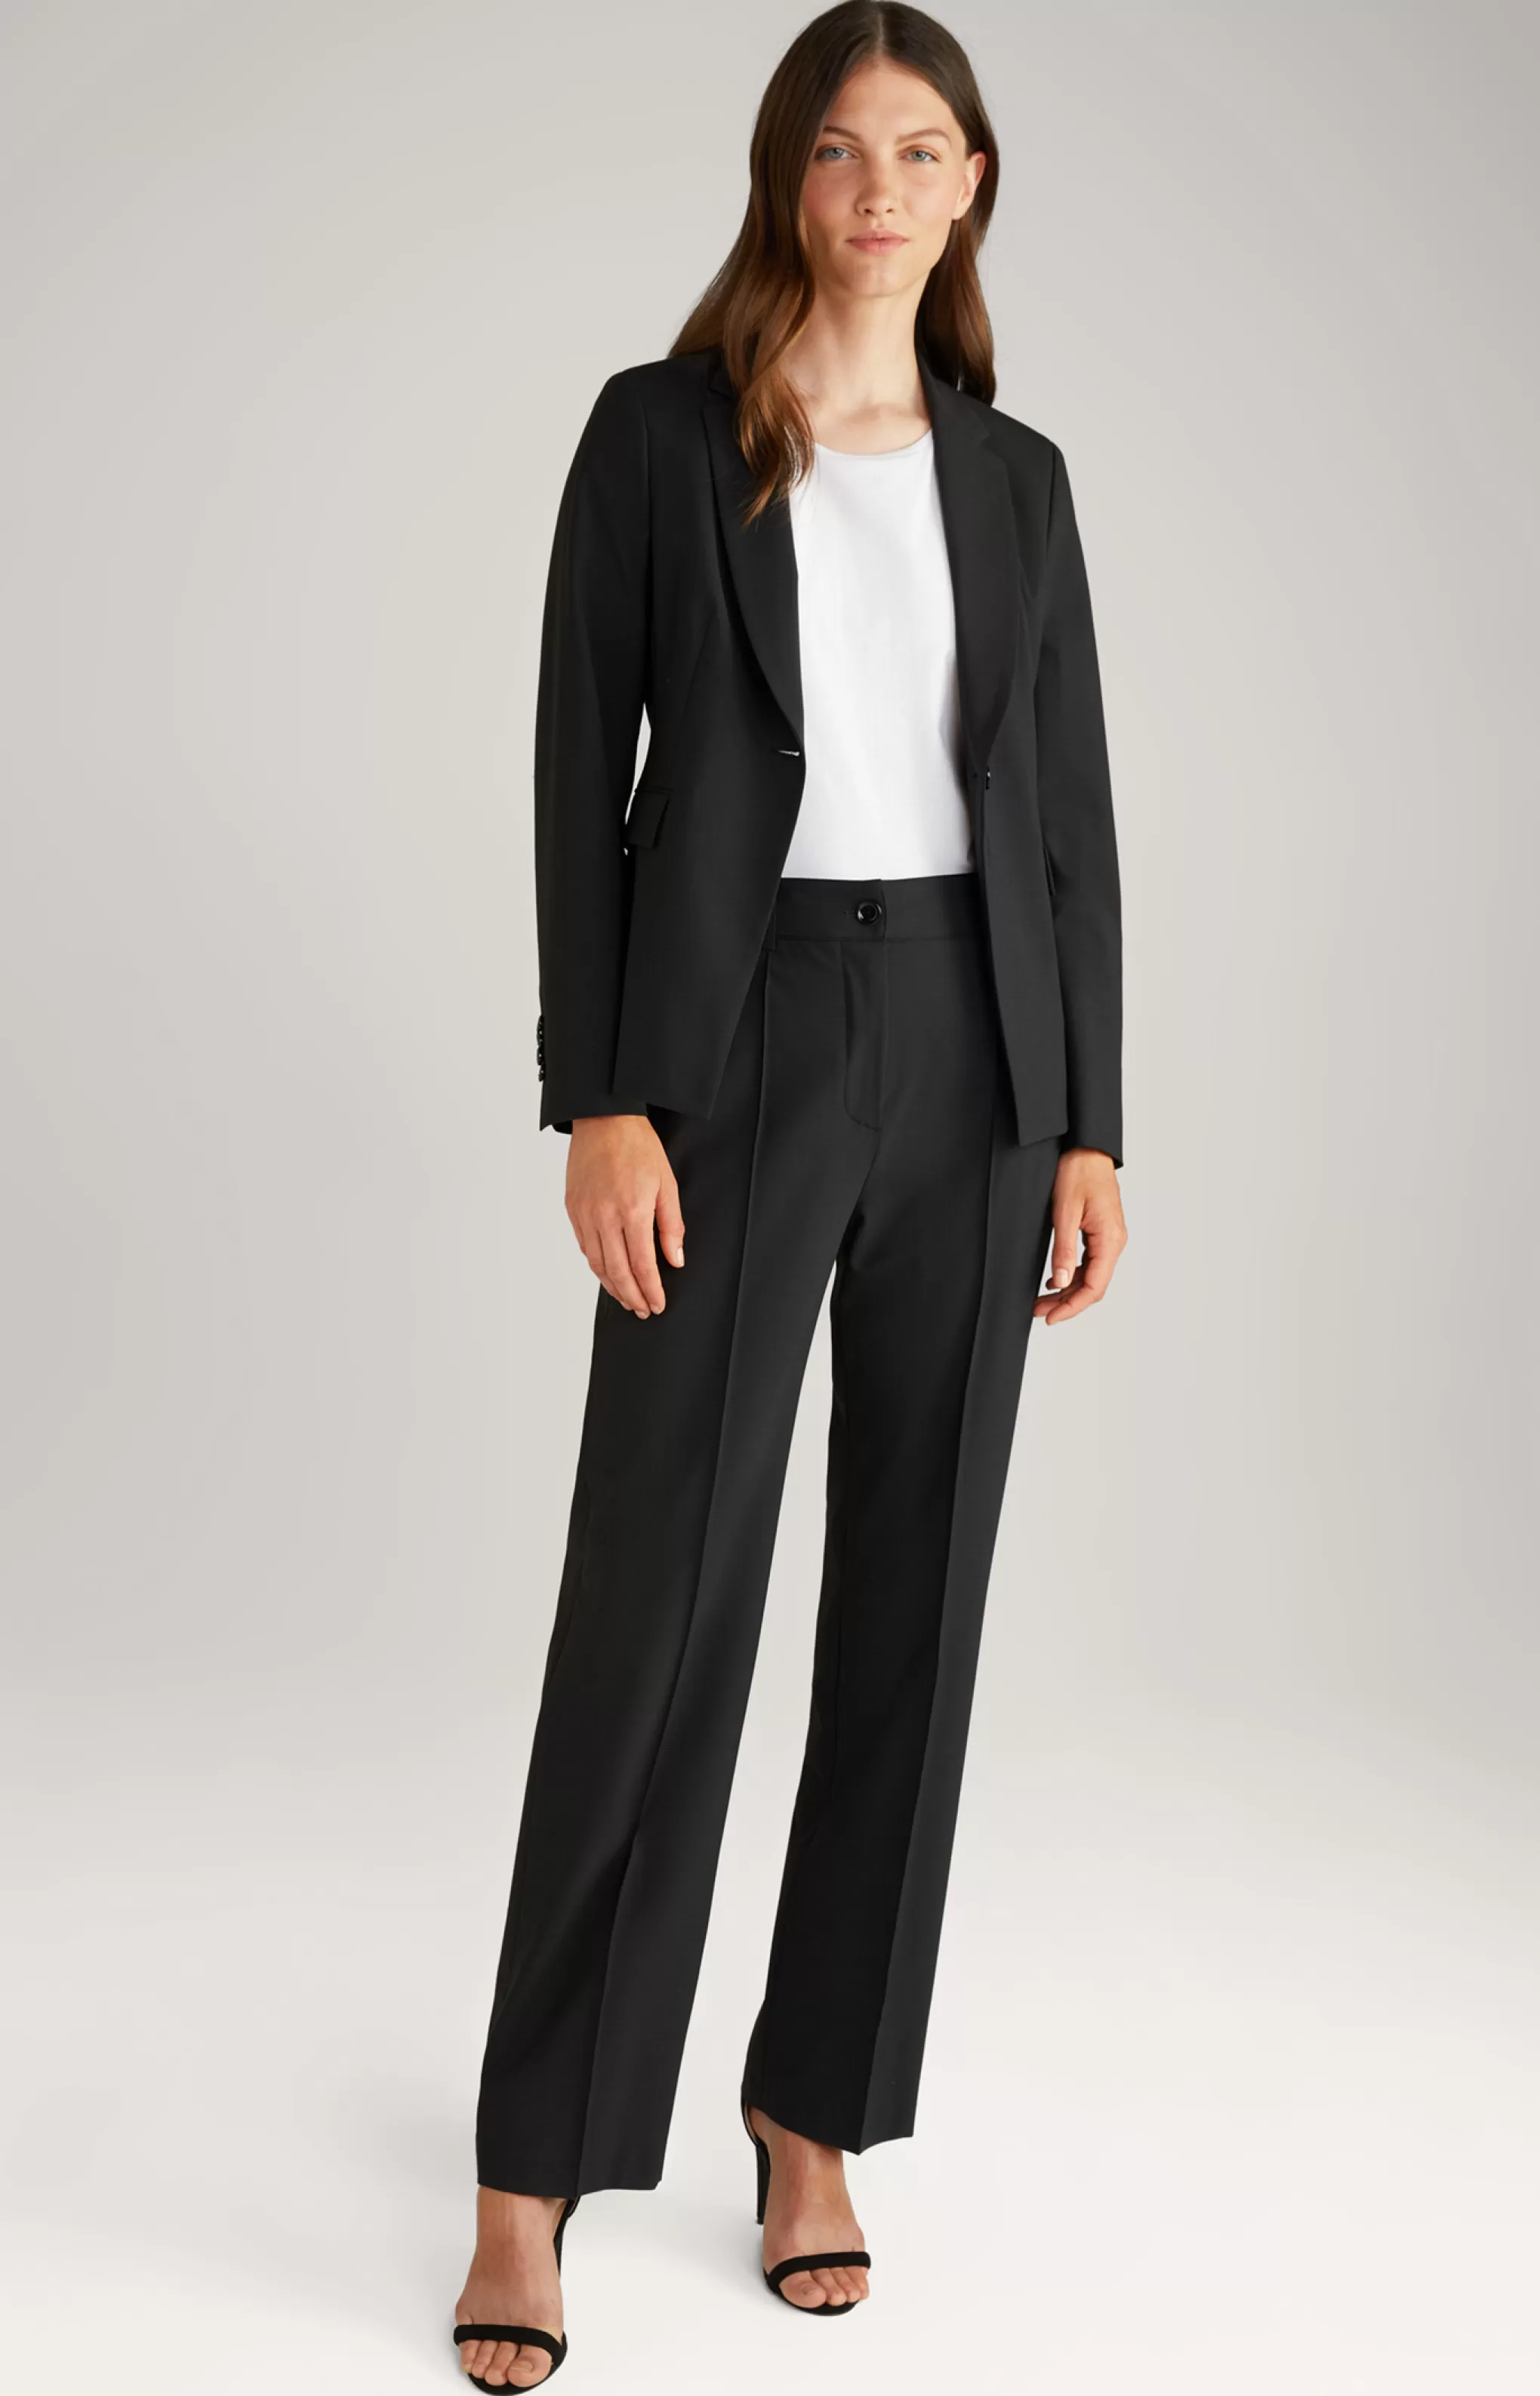 Trousers | Clothing*JOOP Trousers | Clothing Marlene Trousers in